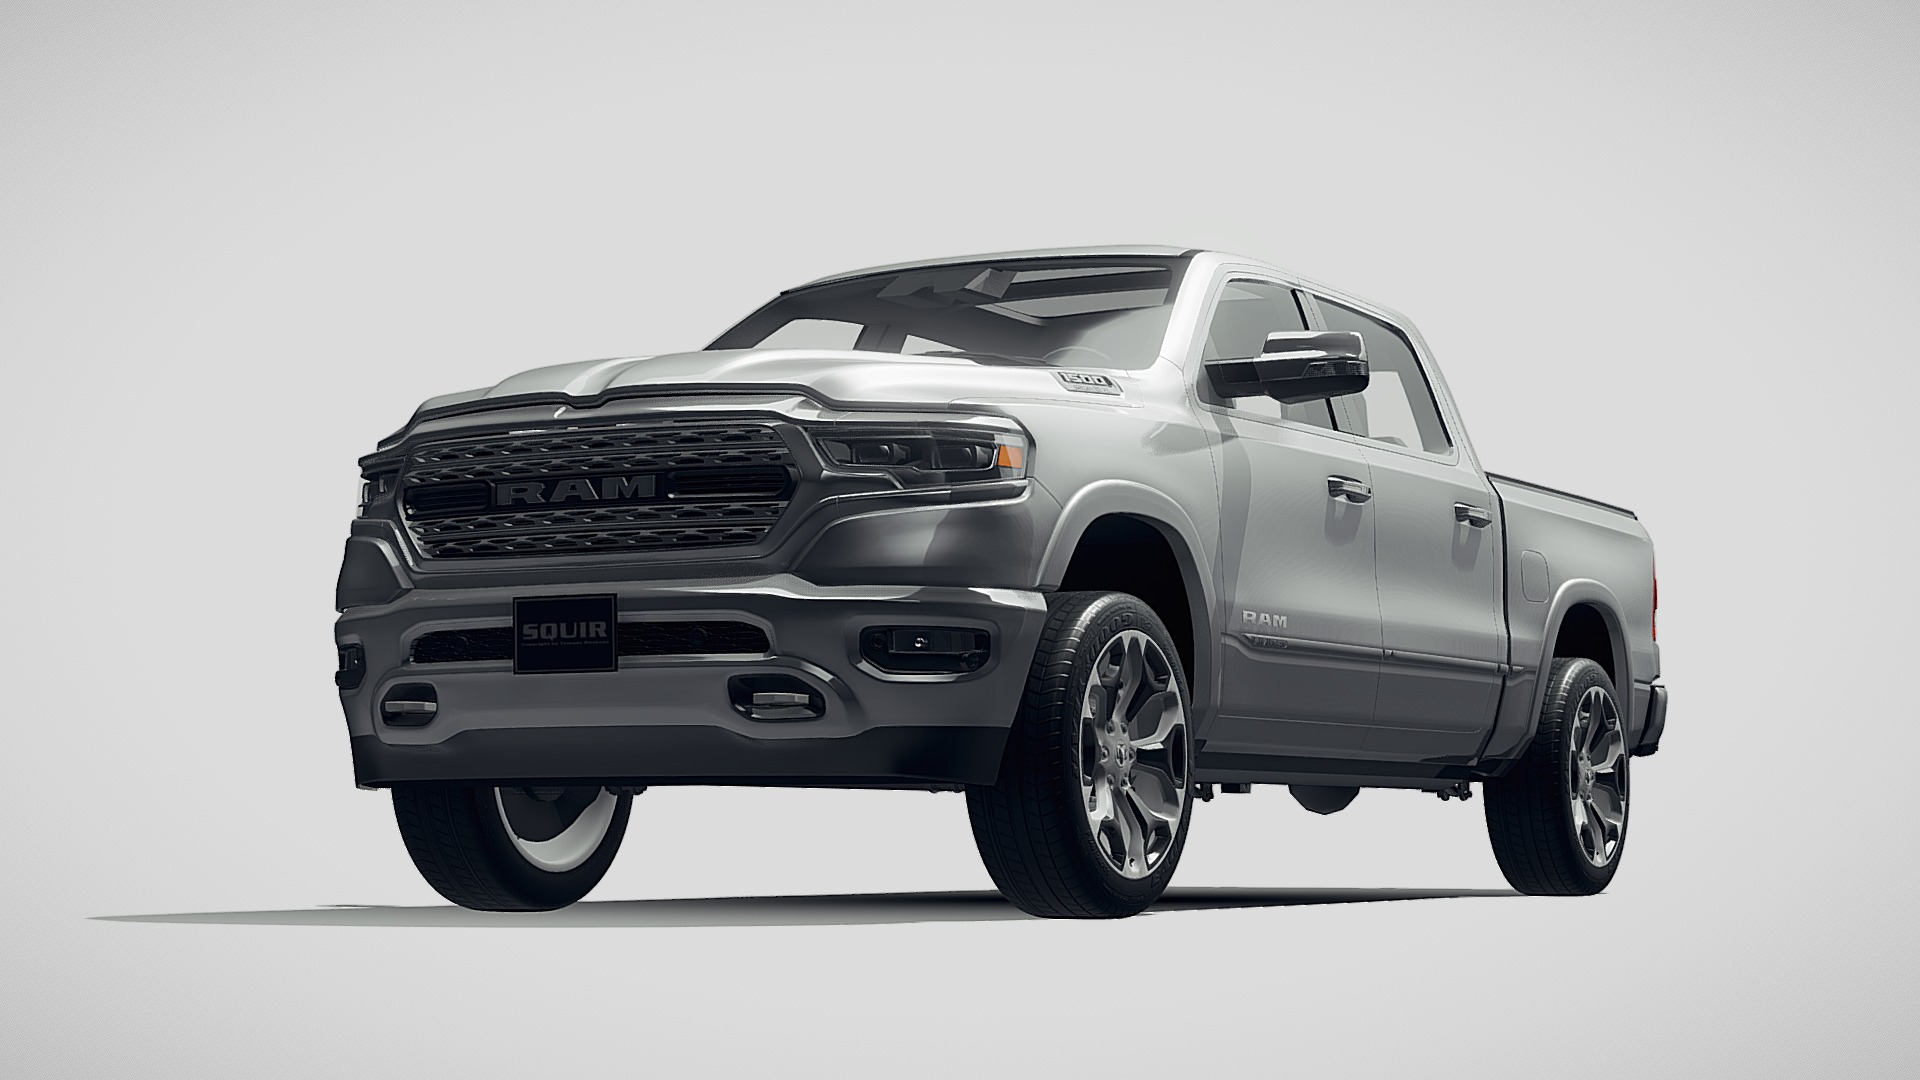 3D model Dodge Ram 1500 2019 - This is a 3D model of the Dodge Ram 1500 2019. The 3D model is about a silver car with a white background.